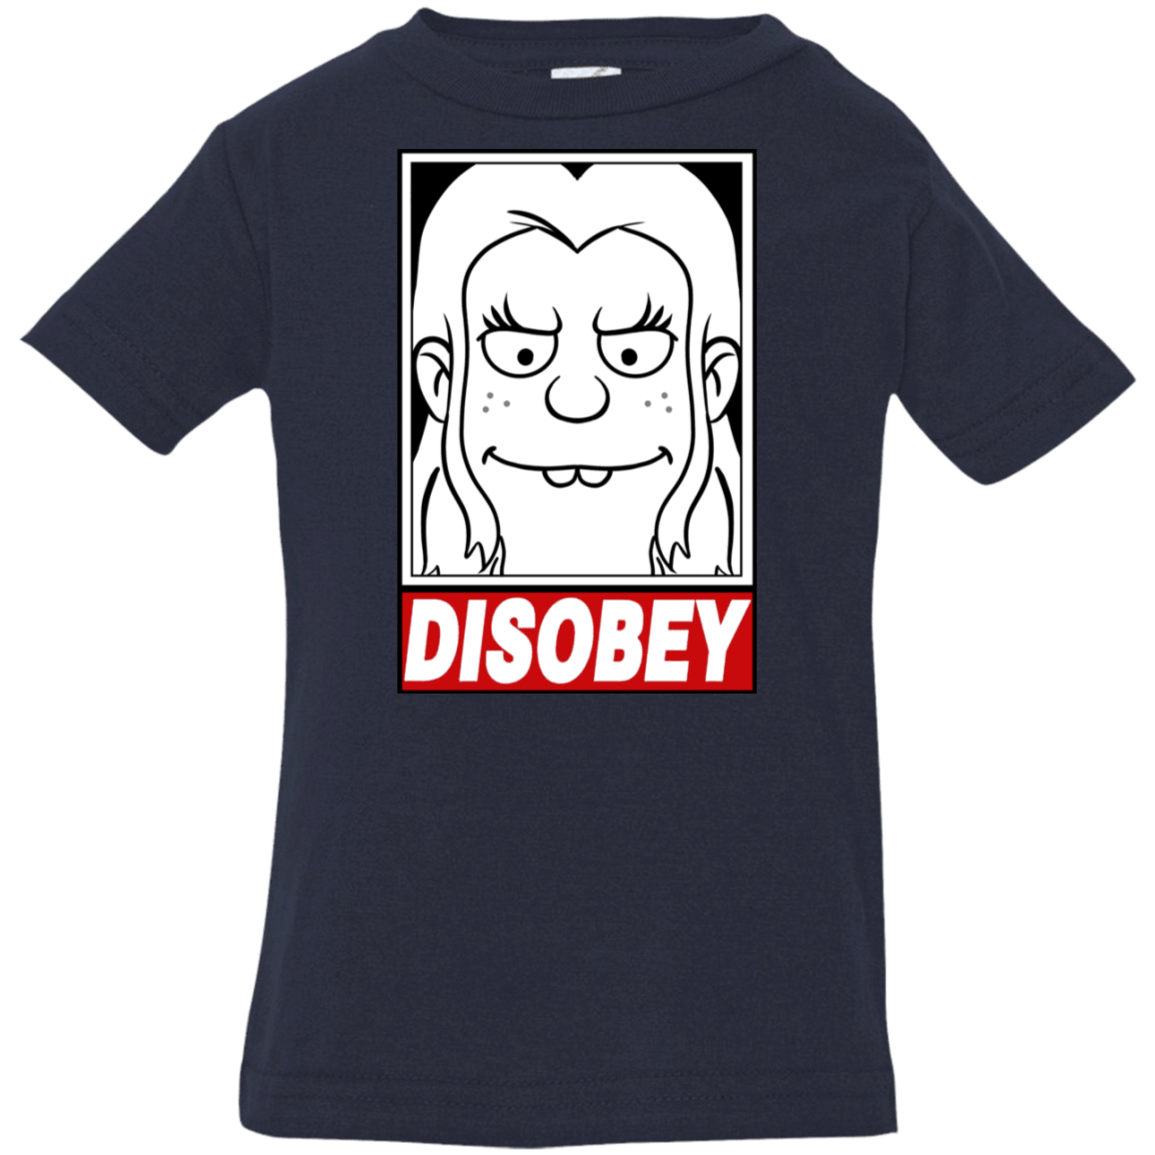 T-Shirts Navy / 6 Months Disobey Infant Premium T-Shirt